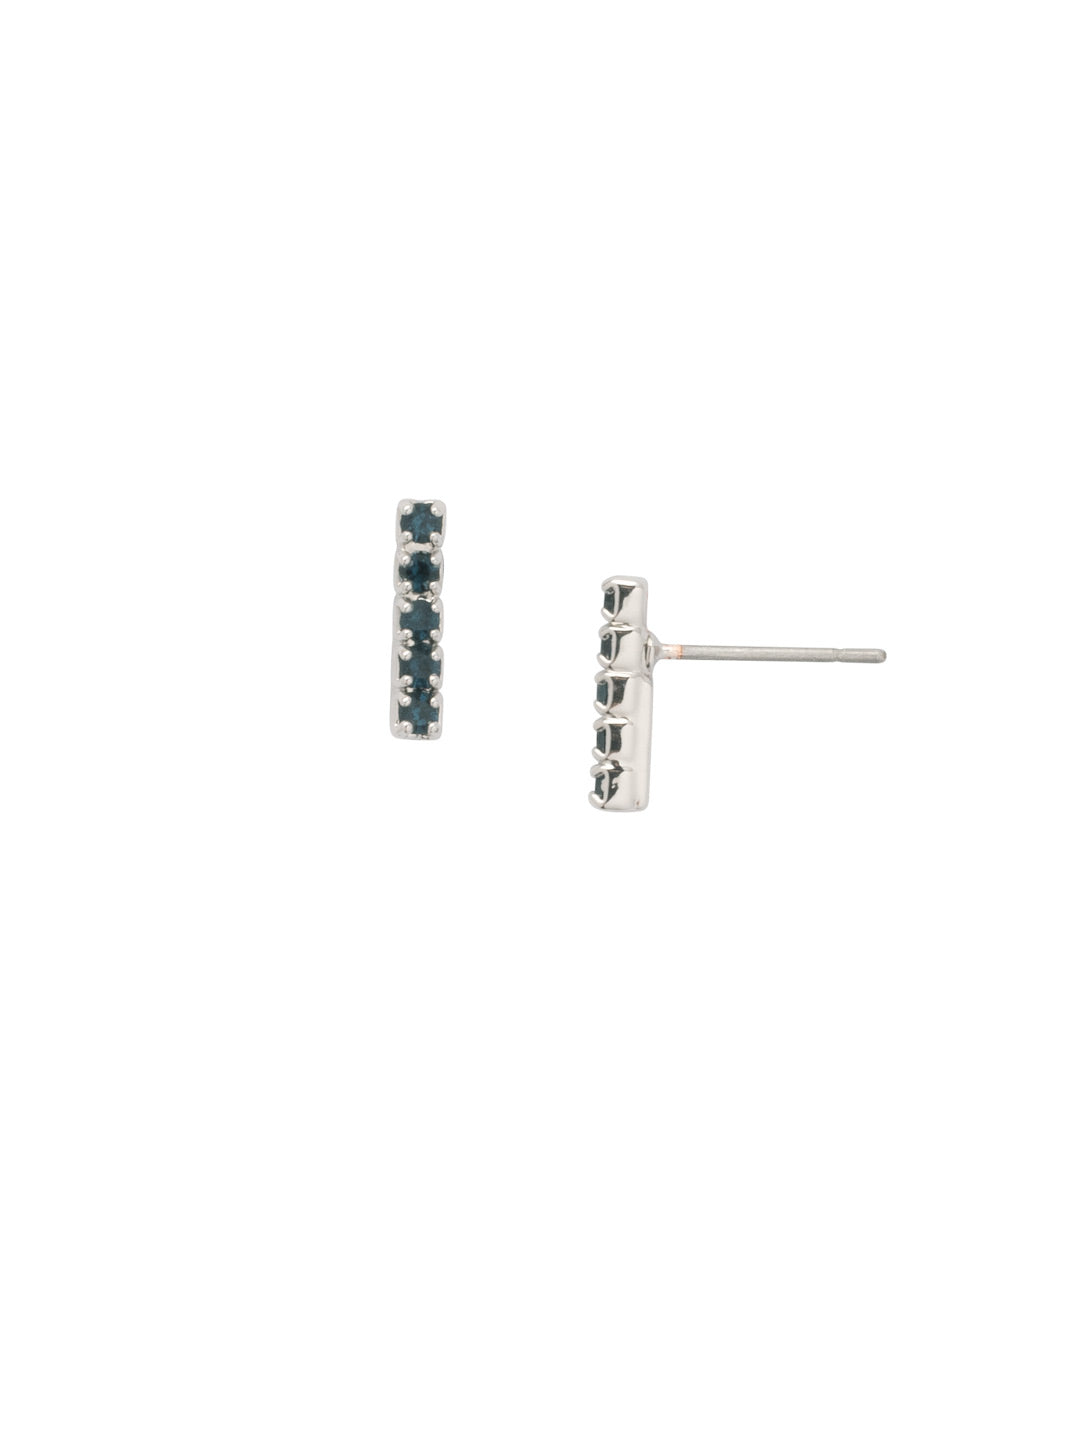 Raina Stud Earring - EDD1PDASP - <p>Stacked just right! Five round crystals form a petite line in this modern post earring. From Sorrelli's Aspen SKY collection in our Palladium finish.</p>